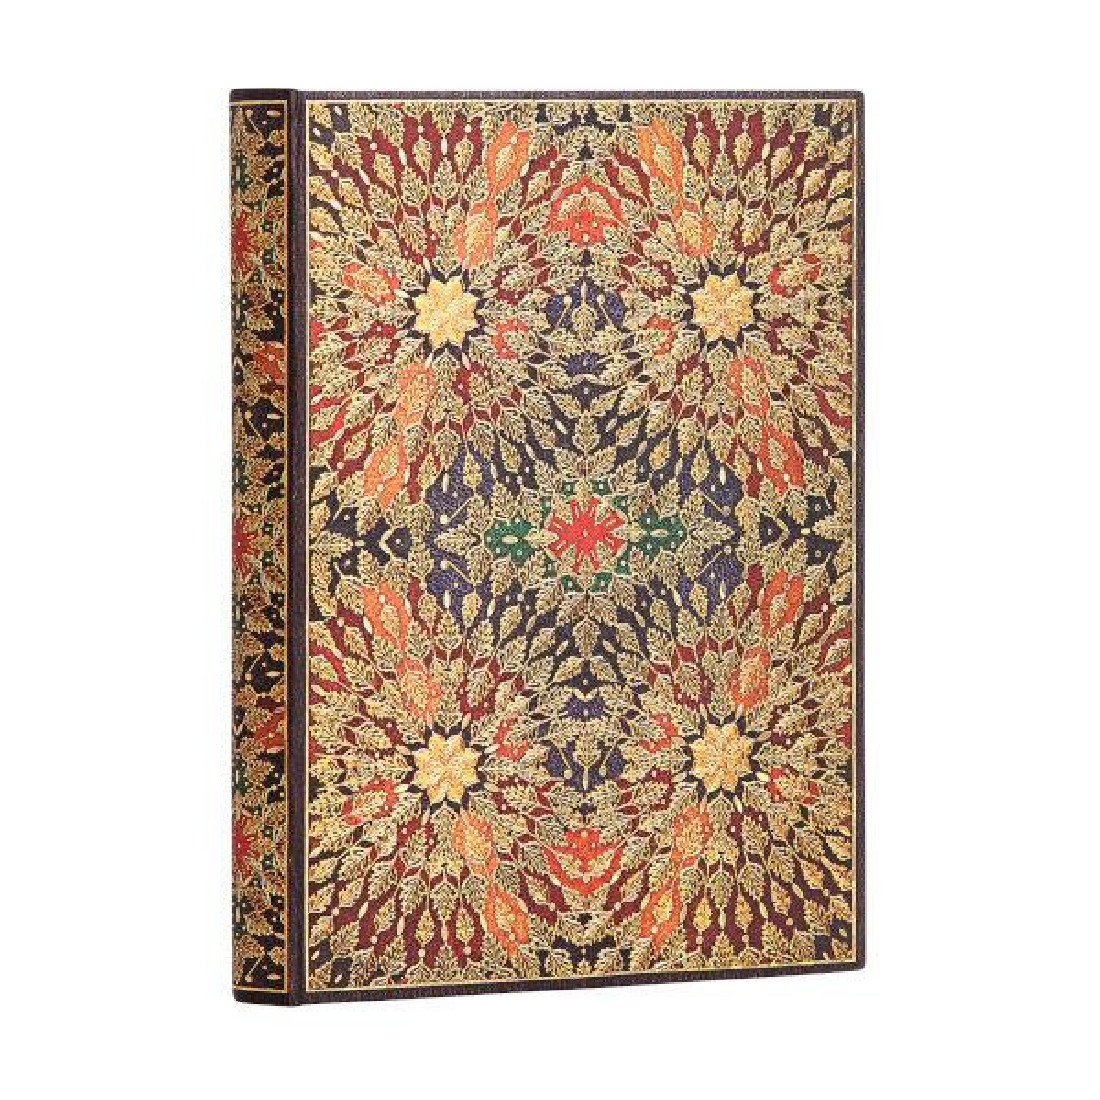 Paperblanks Fire Flowers Midi 13X18 Lined notebook